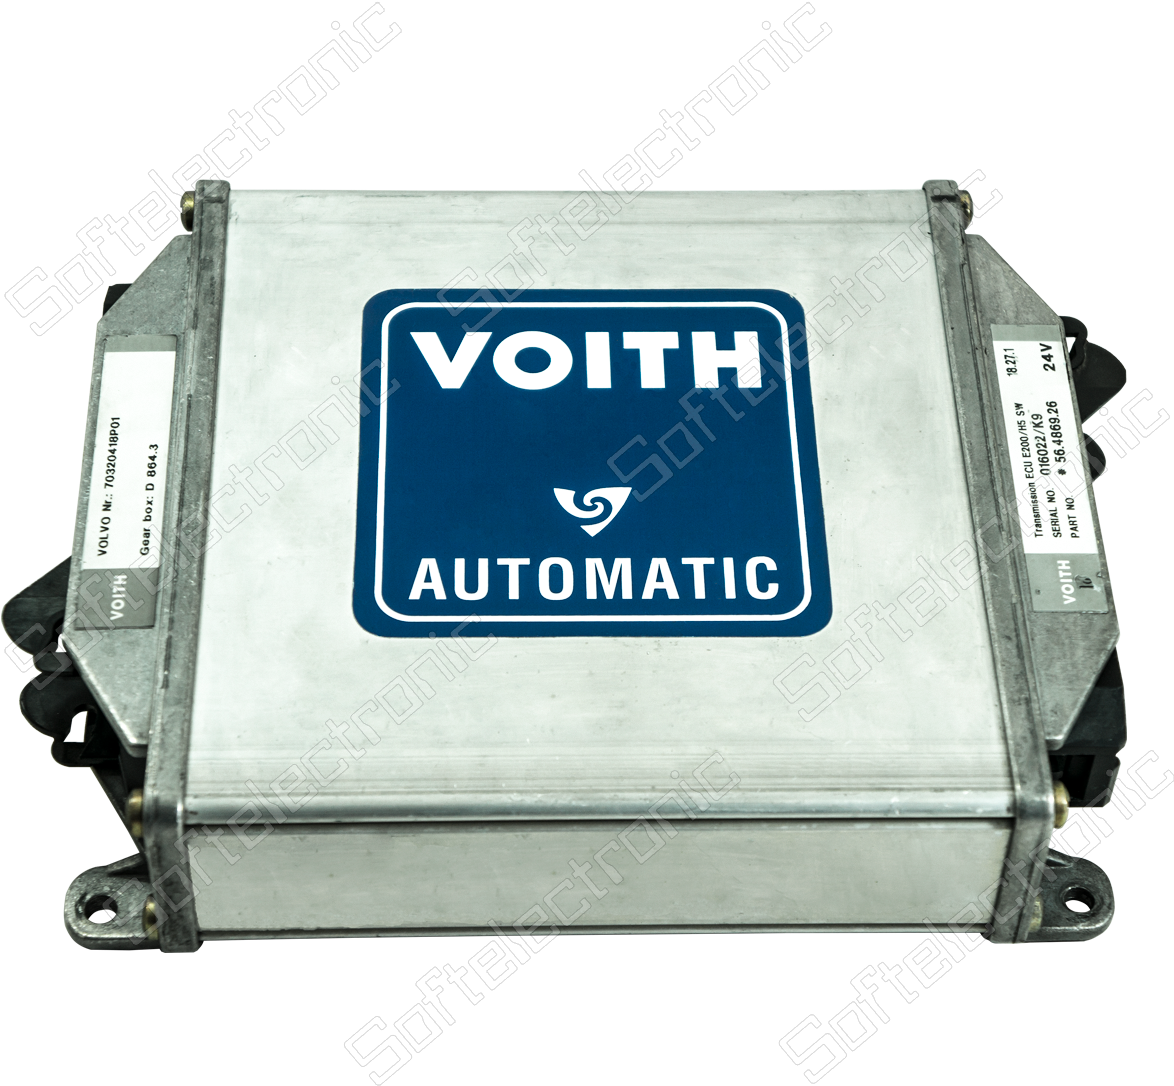 Solaris Tcu Diwa Voith - Voith Clipart (1200x1200), Png Download